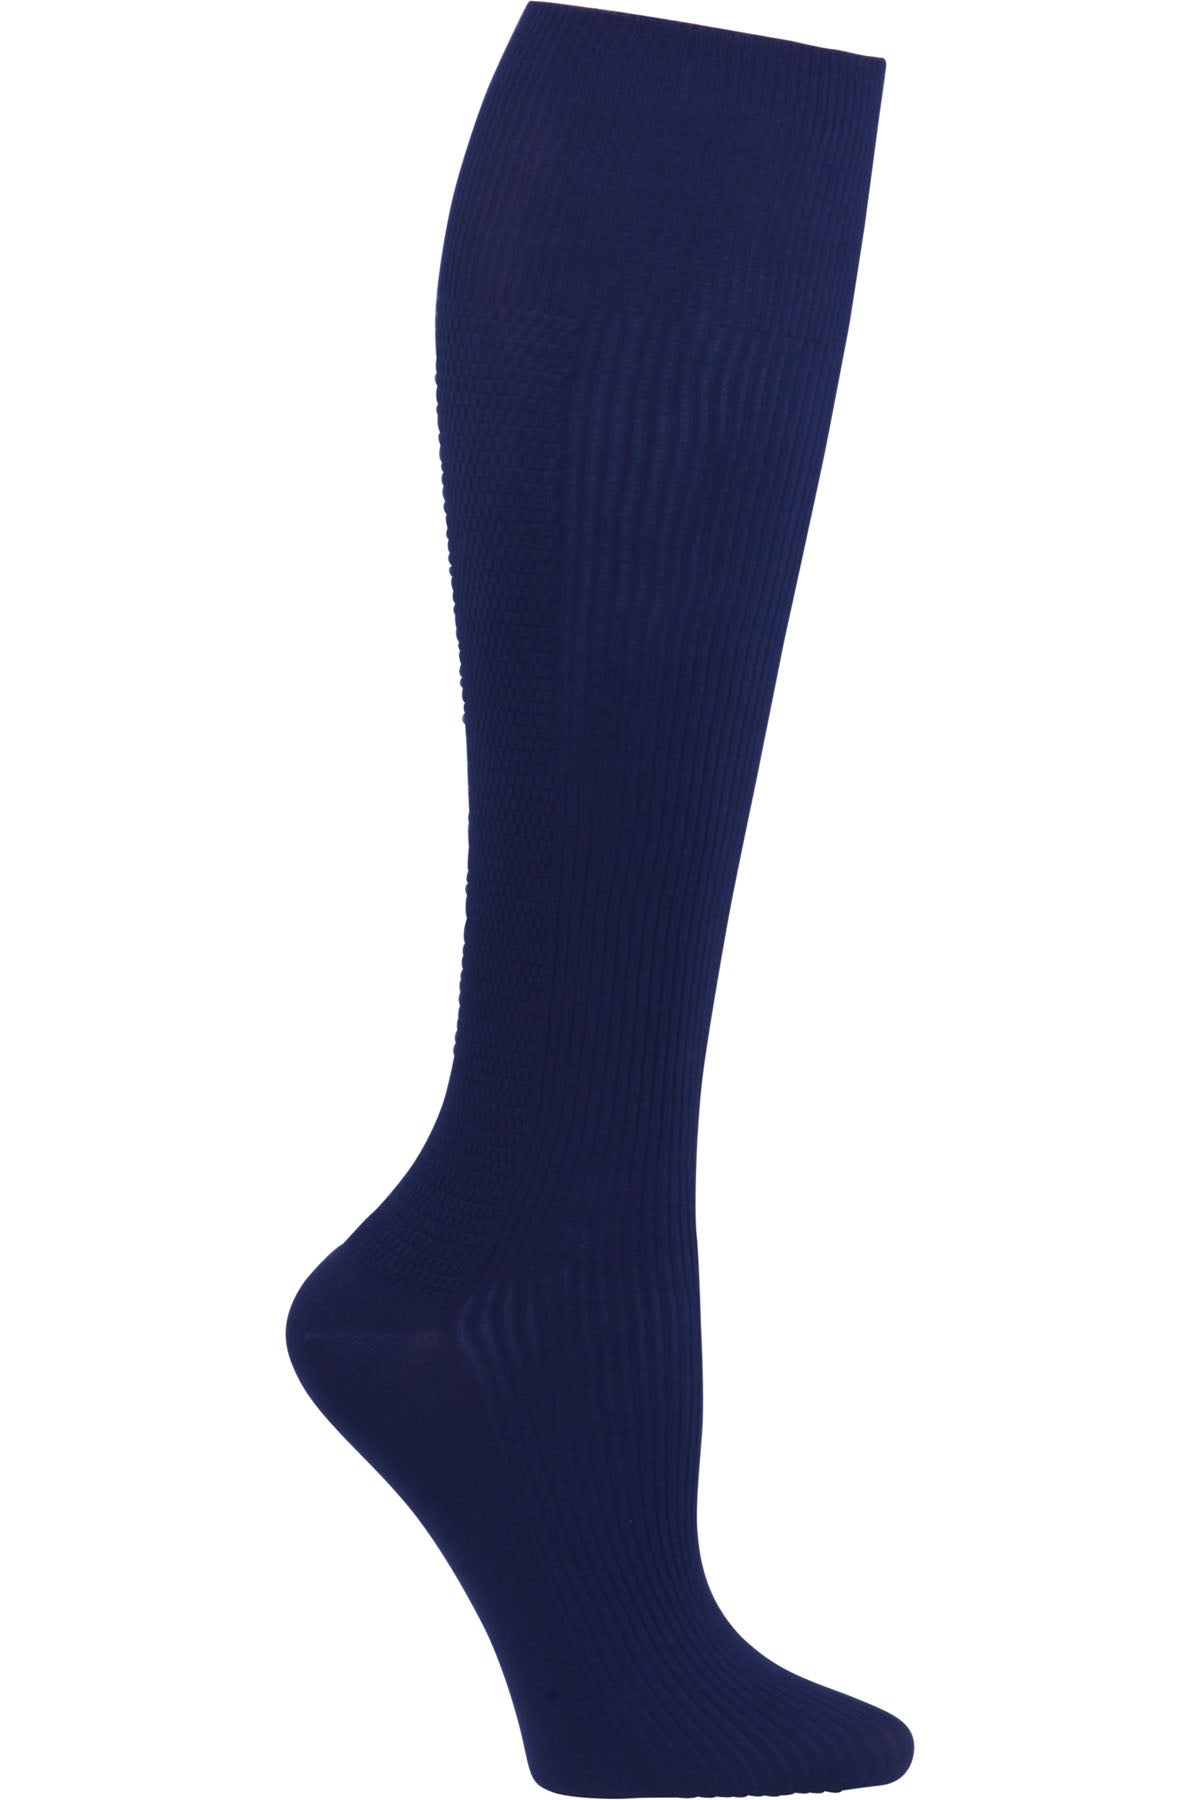 CherokeeCompression Support Sock - Work World - Workwear, Work Boots, Safety Gear